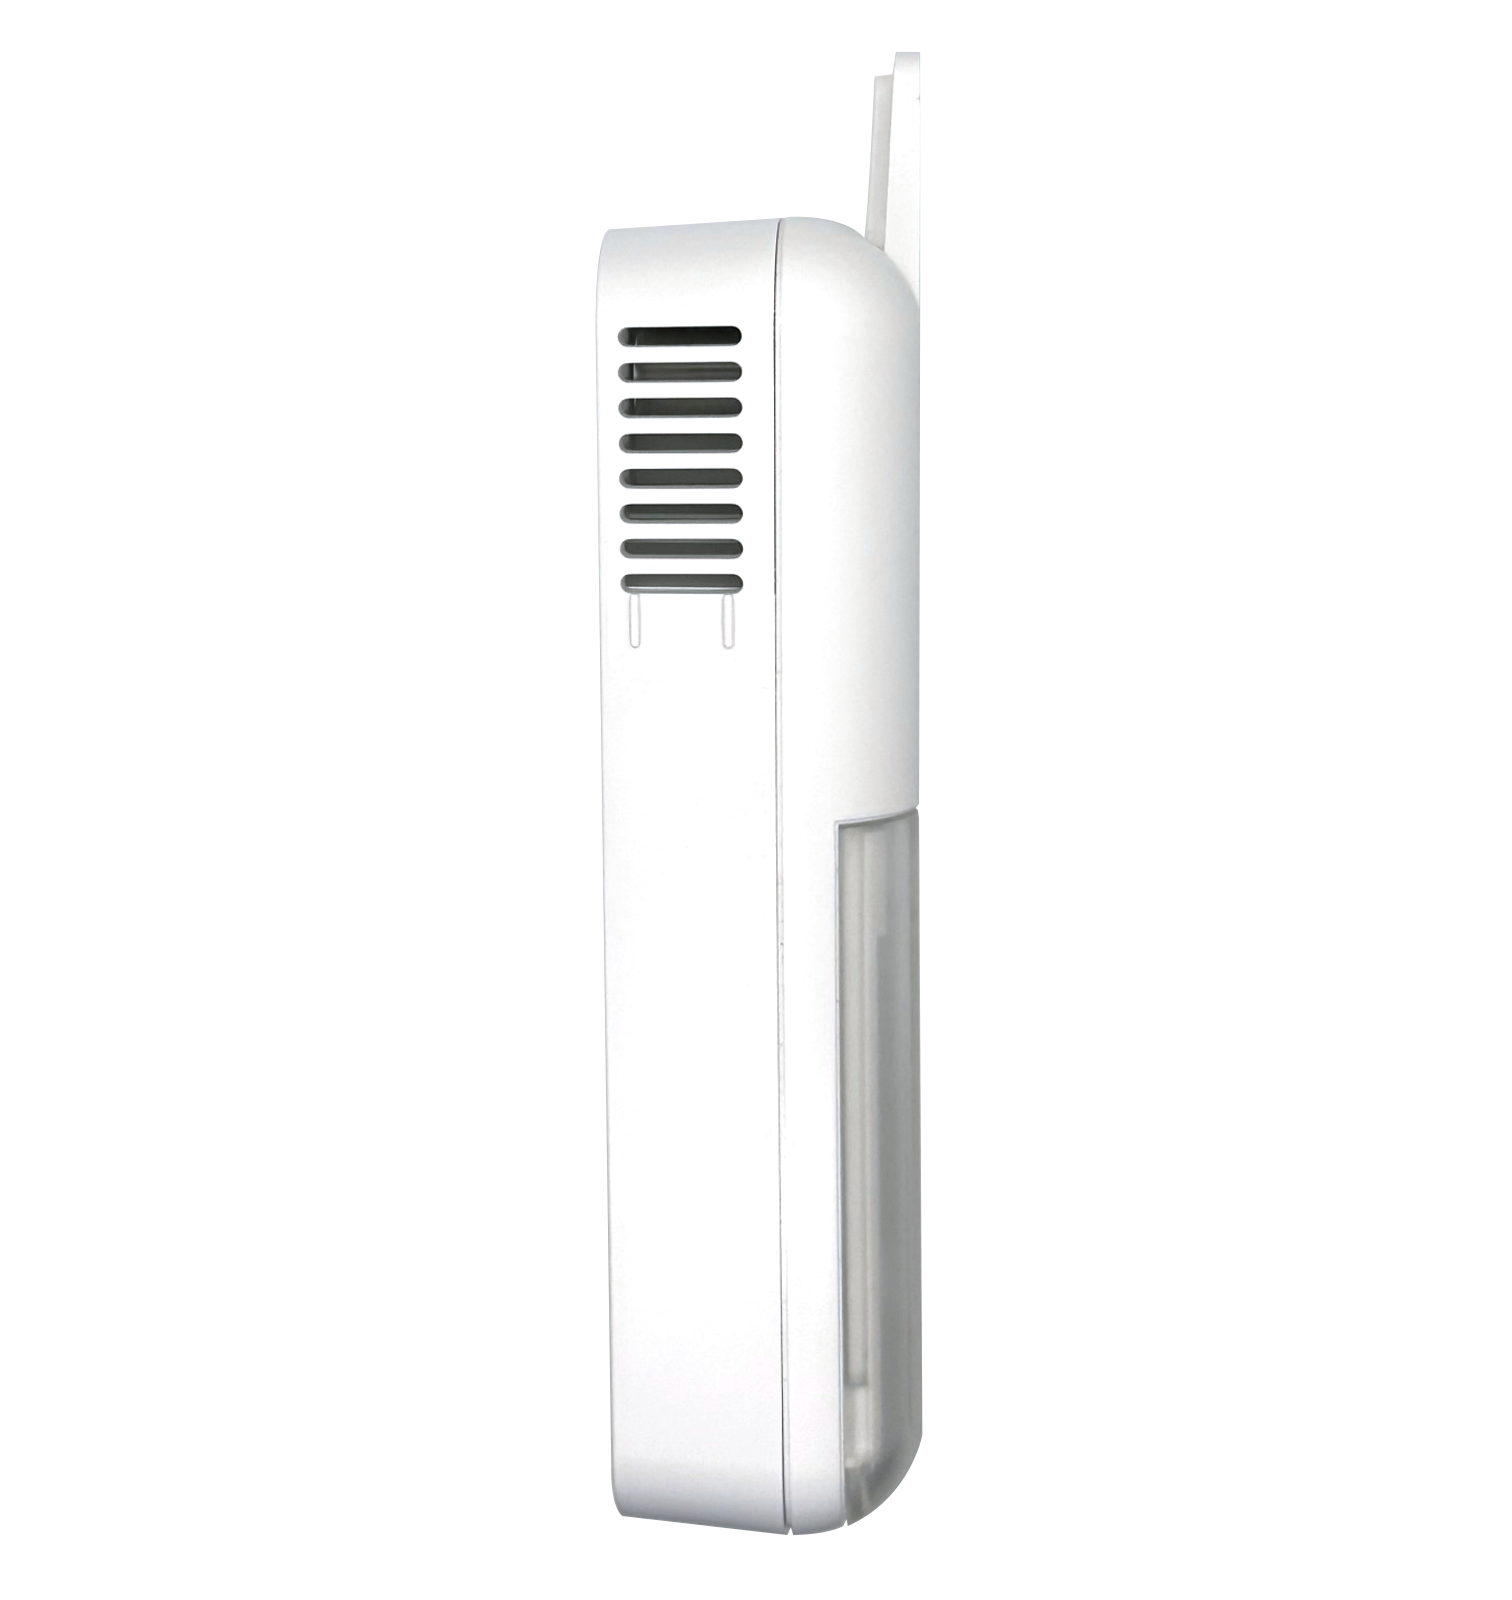 DeNova Detect Natural Gas Alarm 10-Year Battery-operated Natural Gas  Detector with Voice Alert in the Carbon Monoxide Detectors department at